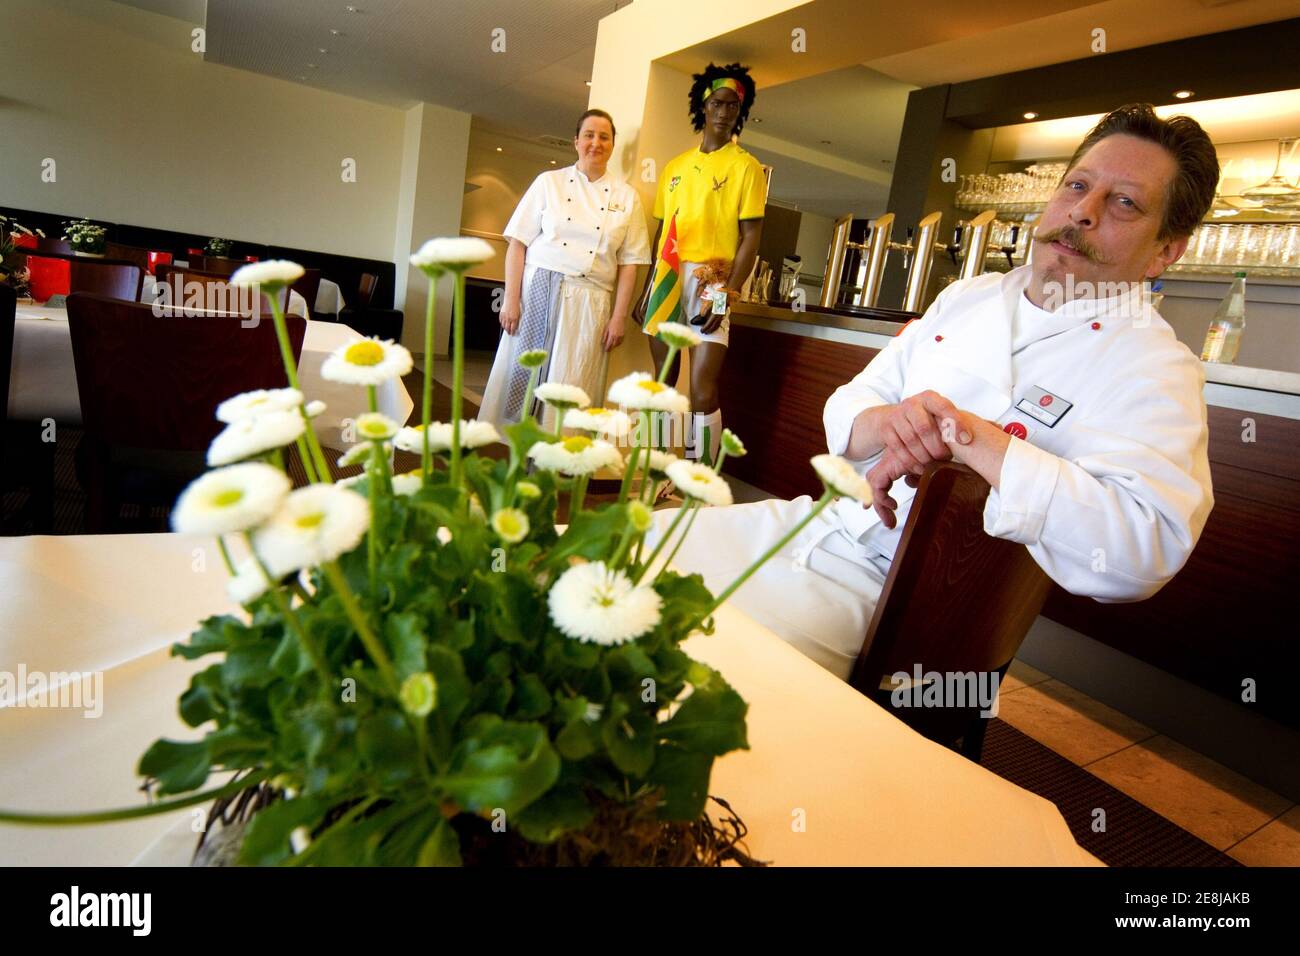 Picture shows the chief cooks Petra Weber (L) and Edwin Schmid (R) in the restaurant of Hotel Waltersbuhl in Wangen near lake Constance April 21, 2006. The Togo national soccer team will be staying here for the duration of the World Cup 2006 tournament.  WORLD CUP 2006 PREVIEW HOTEL  REUTERS/Miro Kuzmanovic Stock Photo